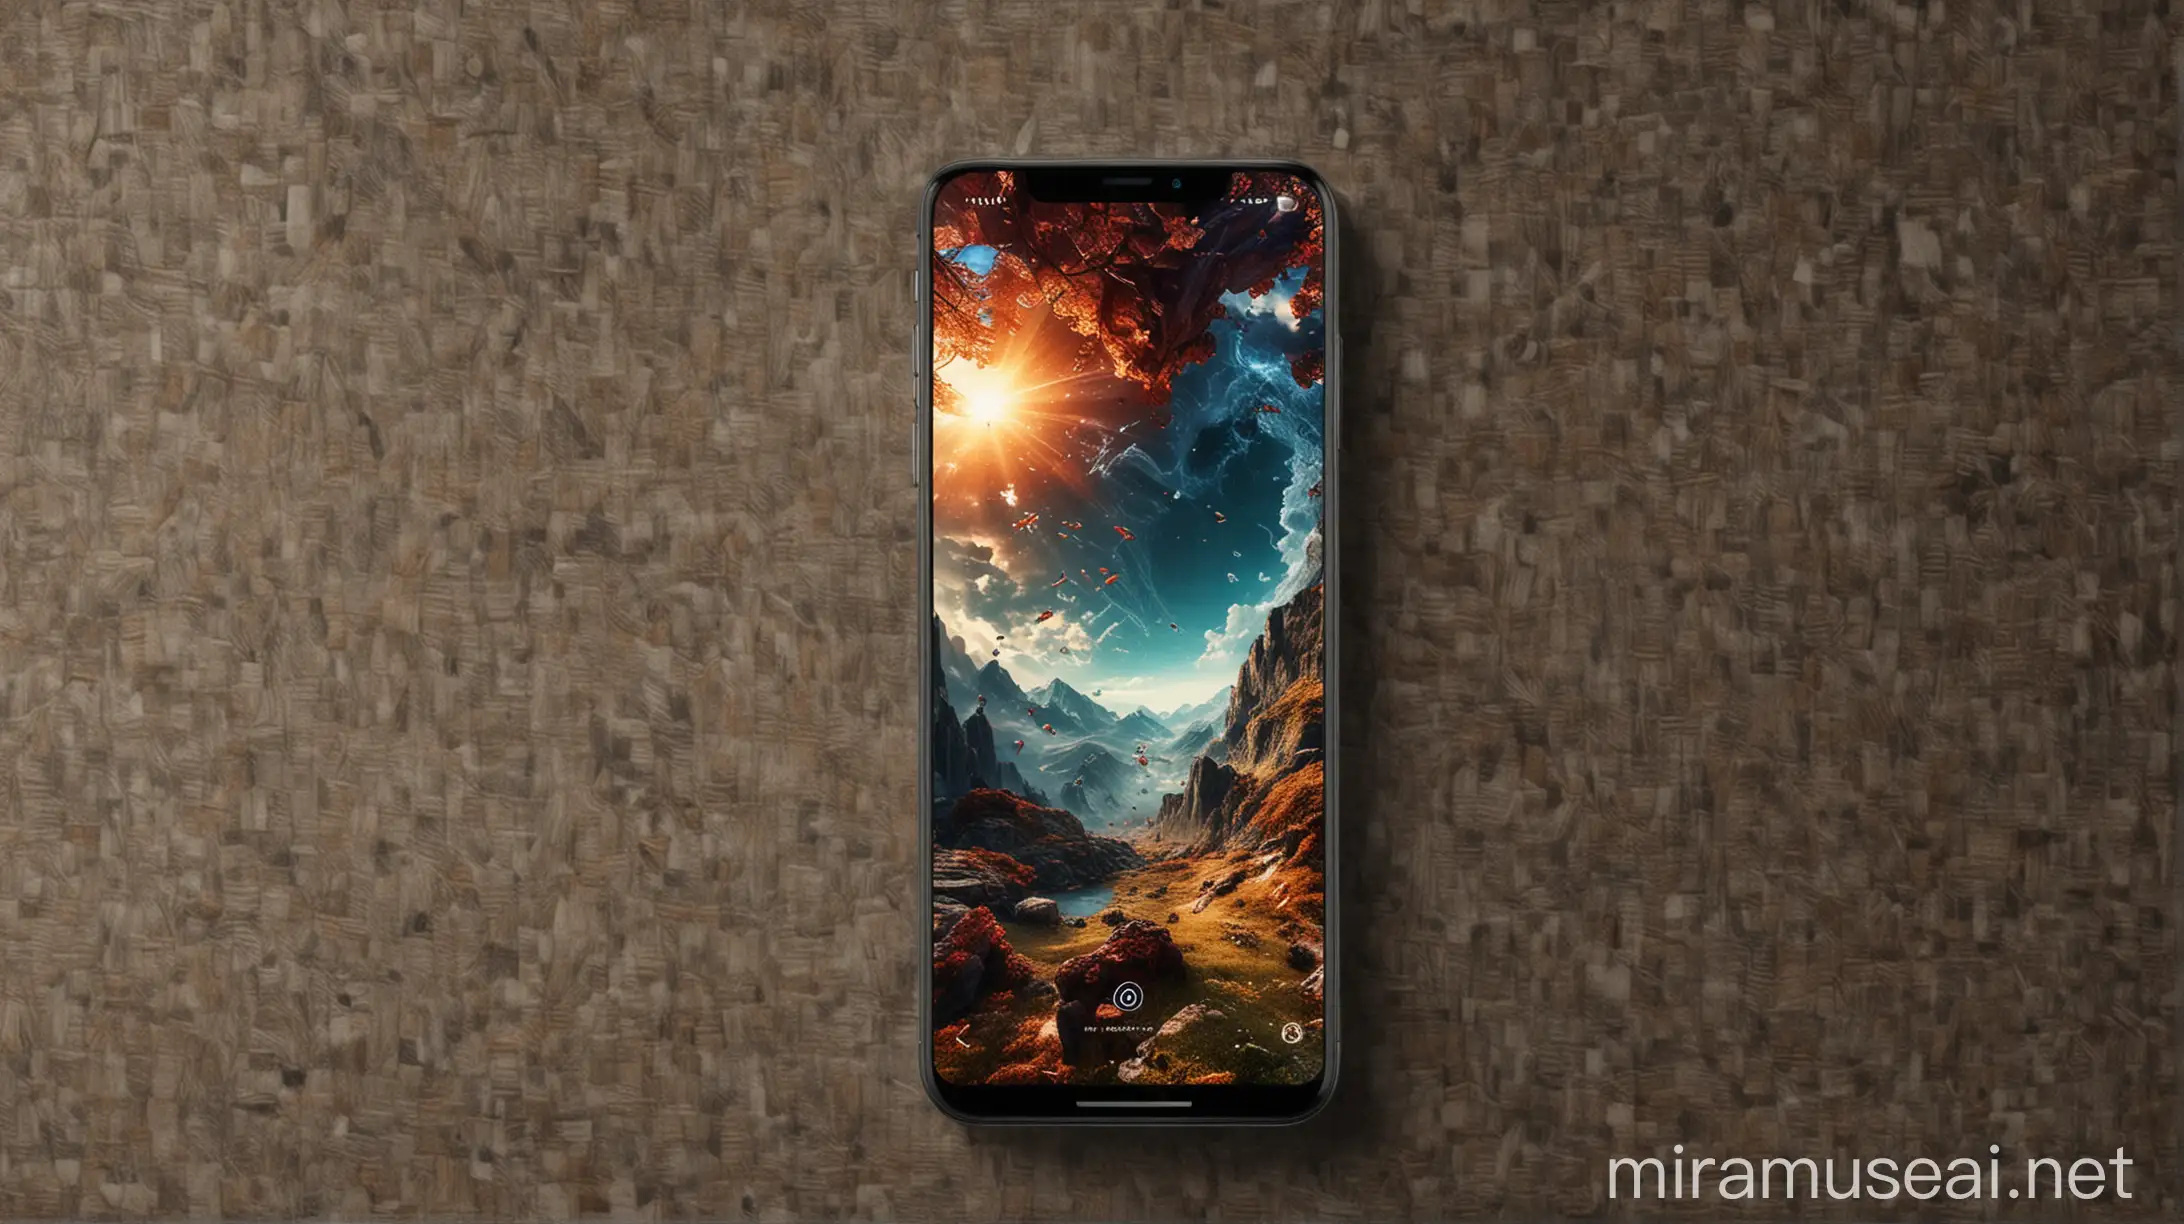 Transform your device into a work of art with our unique and creative wallpaper options. With visually descriptive and detailed renderings, our AI platform will bring your favorite images to life in 4k, 8k, 16k, and 32k resolutions.